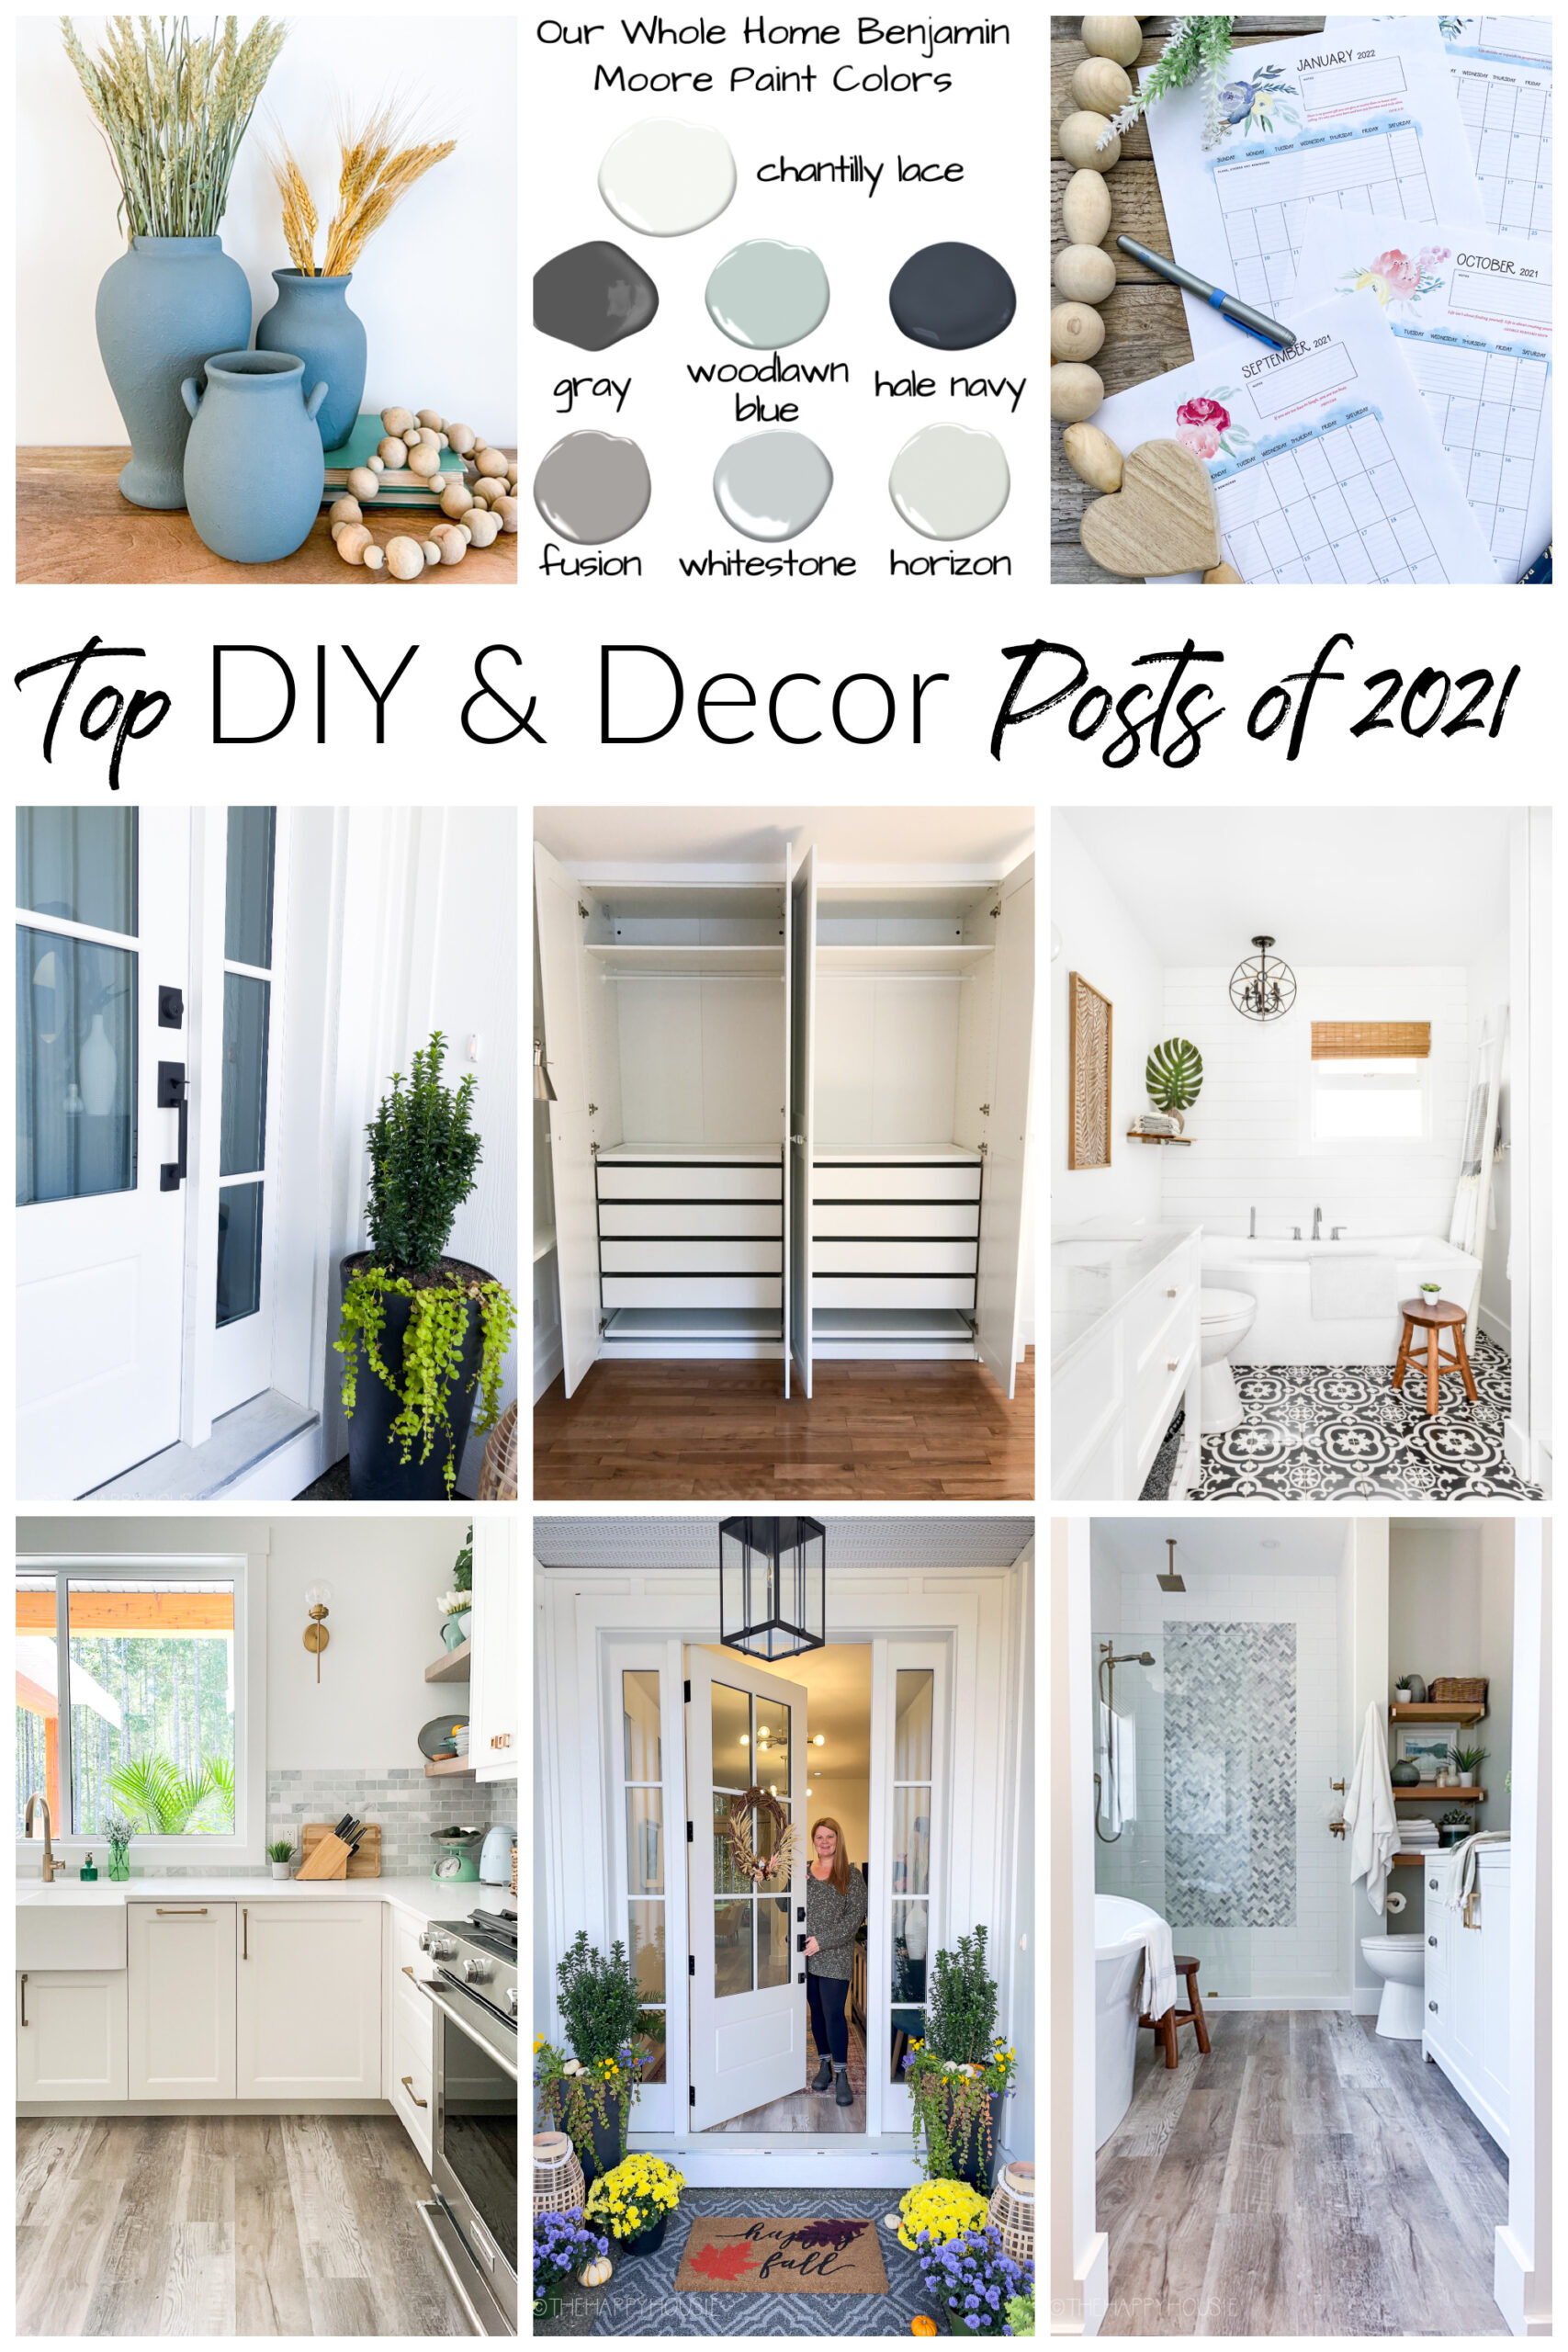 a collage image with top DIY and decor posts of 2021